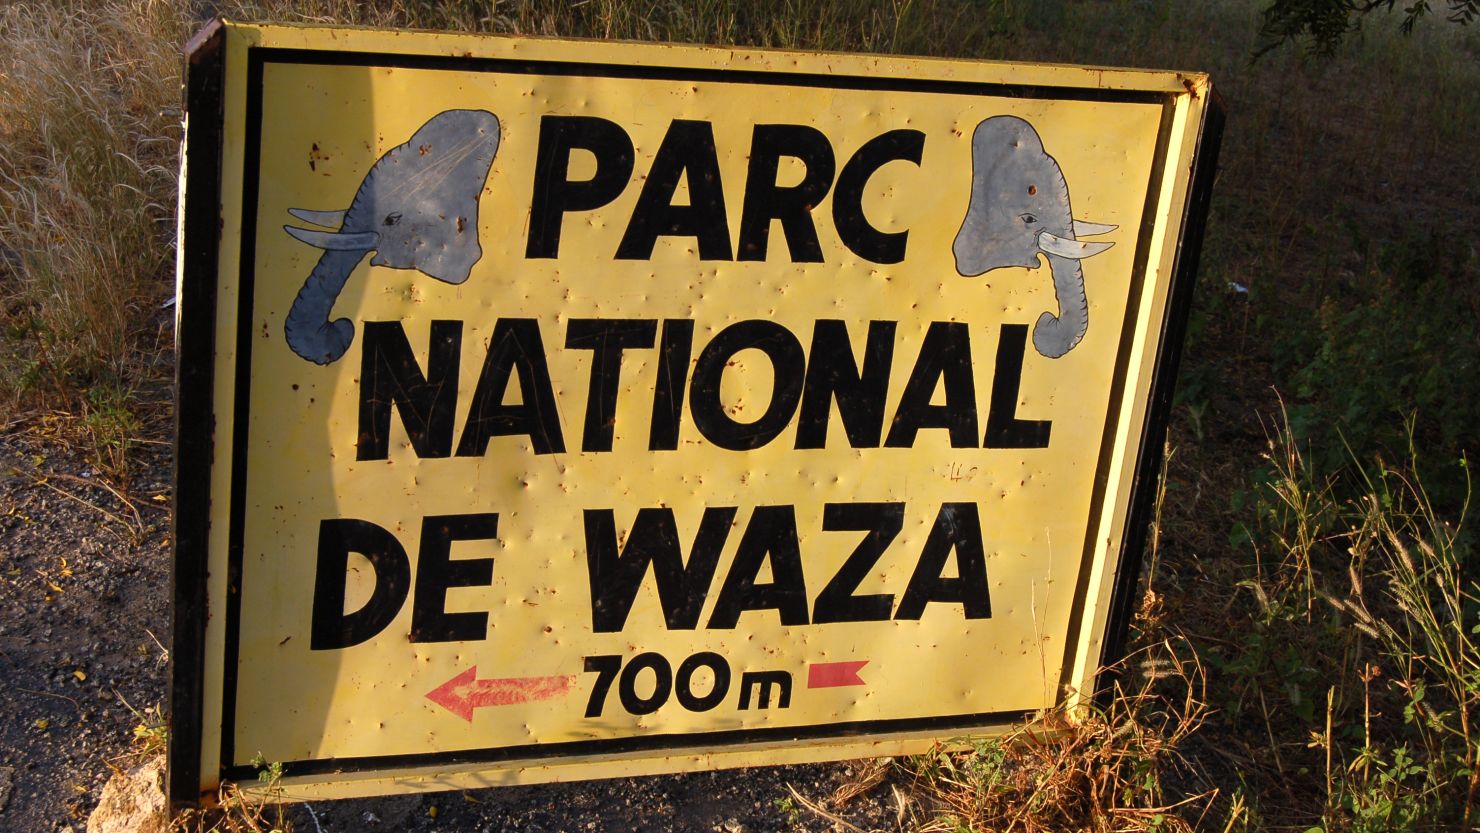 French tourists were kidnapped on Tuesday in Waza National Park in northern Cameroon.